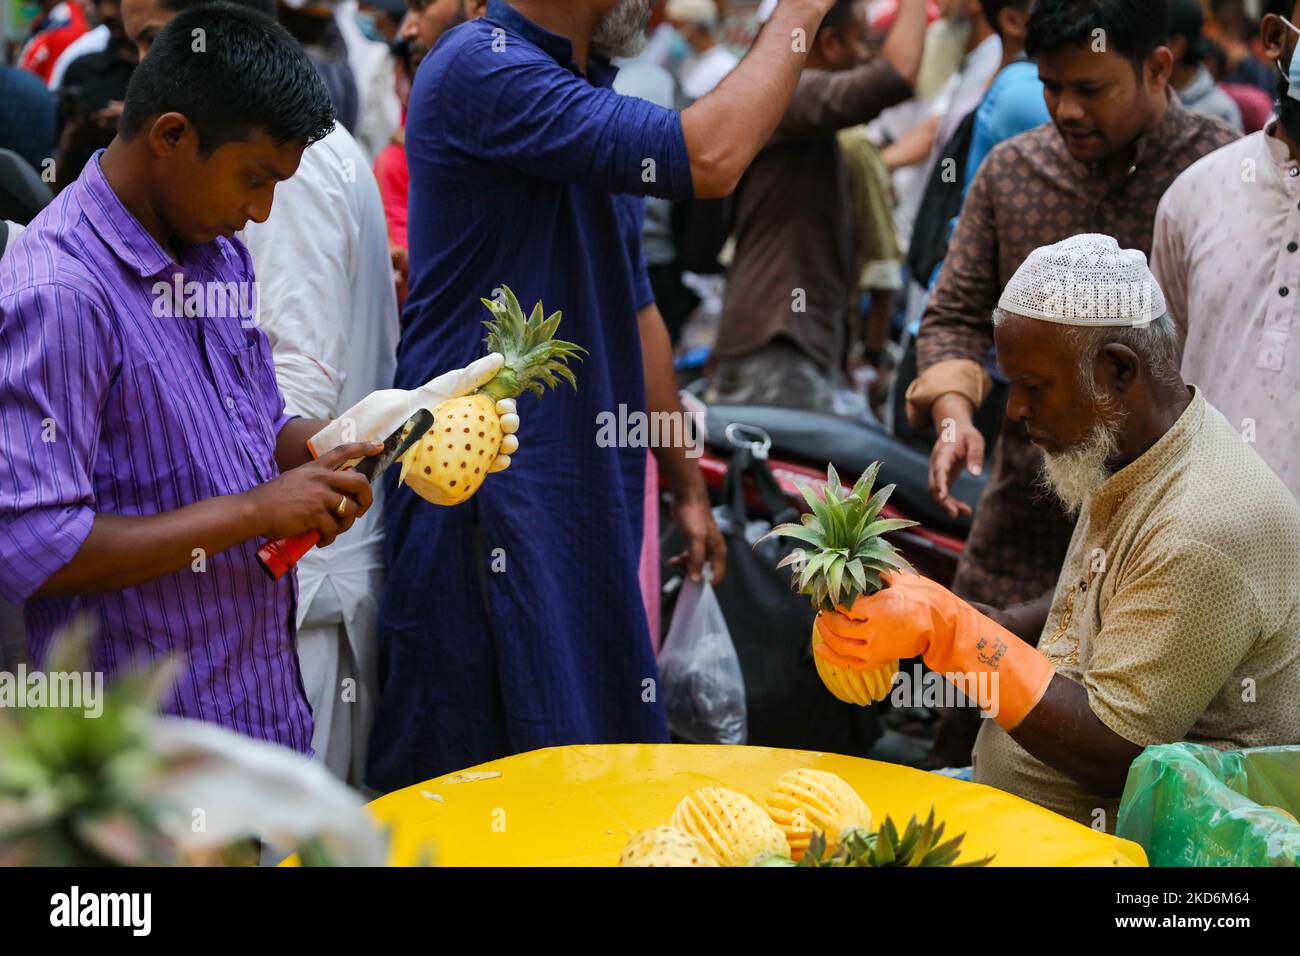 People are buying Ifter food items on first day at ramadan in Dhaka, Bangladesh on April 03, 2022. According to the Islamic calendar, Ramadan marks the most auspicious month of Islam across the world. It is considered the ninth month of the Islamic calendar and occurs at the end of the Shaban month. (Photo by Kazi Salahuddin Razu/NurPhoto) Stock Photo